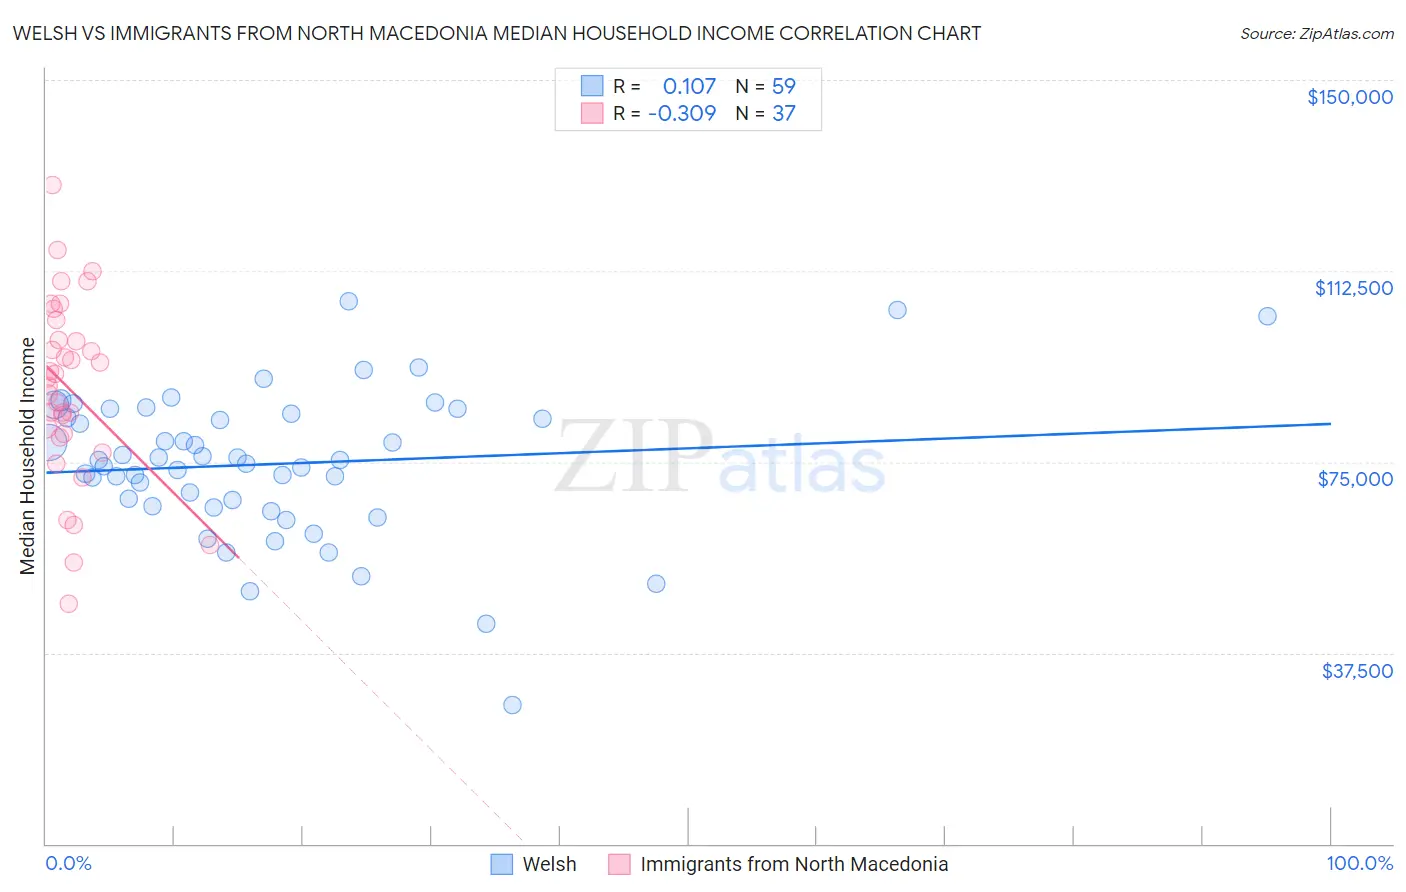 Welsh vs Immigrants from North Macedonia Median Household Income